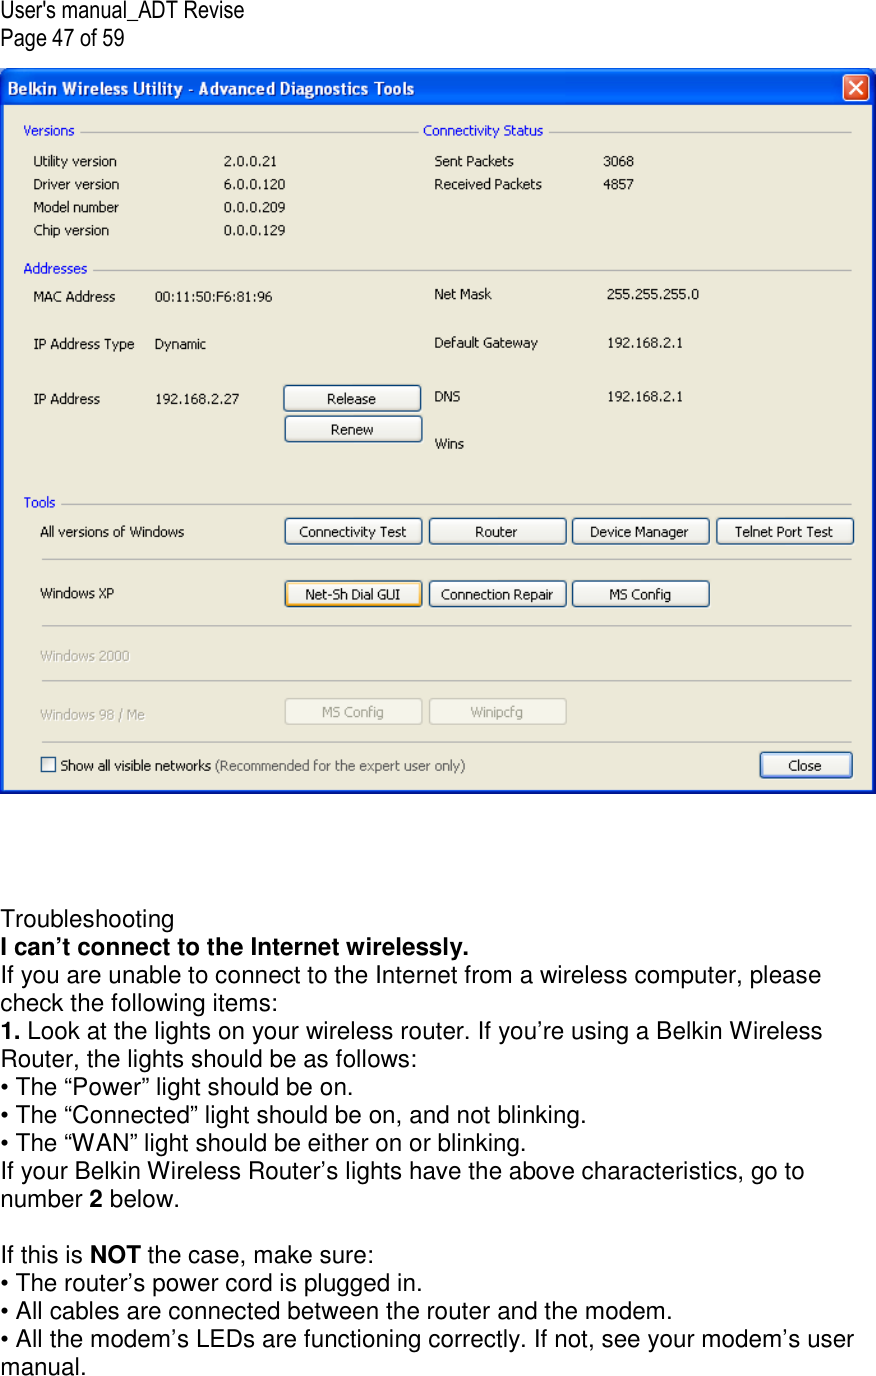 User&apos;s manual_ADT Revise Page 47 of 59       Troubleshooting I can’t connect to the Internet wirelessly. If you are unable to connect to the Internet from a wireless computer, please check the following items: 1. Look at the lights on your wireless router. If you’re using a Belkin Wireless Router, the lights should be as follows: • The “Power” light should be on. • The “Connected” light should be on, and not blinking. • The “WAN” light should be either on or blinking. If your Belkin Wireless Router’s lights have the above characteristics, go to number 2 below.  If this is NOT the case, make sure: • The router’s power cord is plugged in. • All cables are connected between the router and the modem. • All the modem’s LEDs are functioning correctly. If not, see your modem’s user manual. 